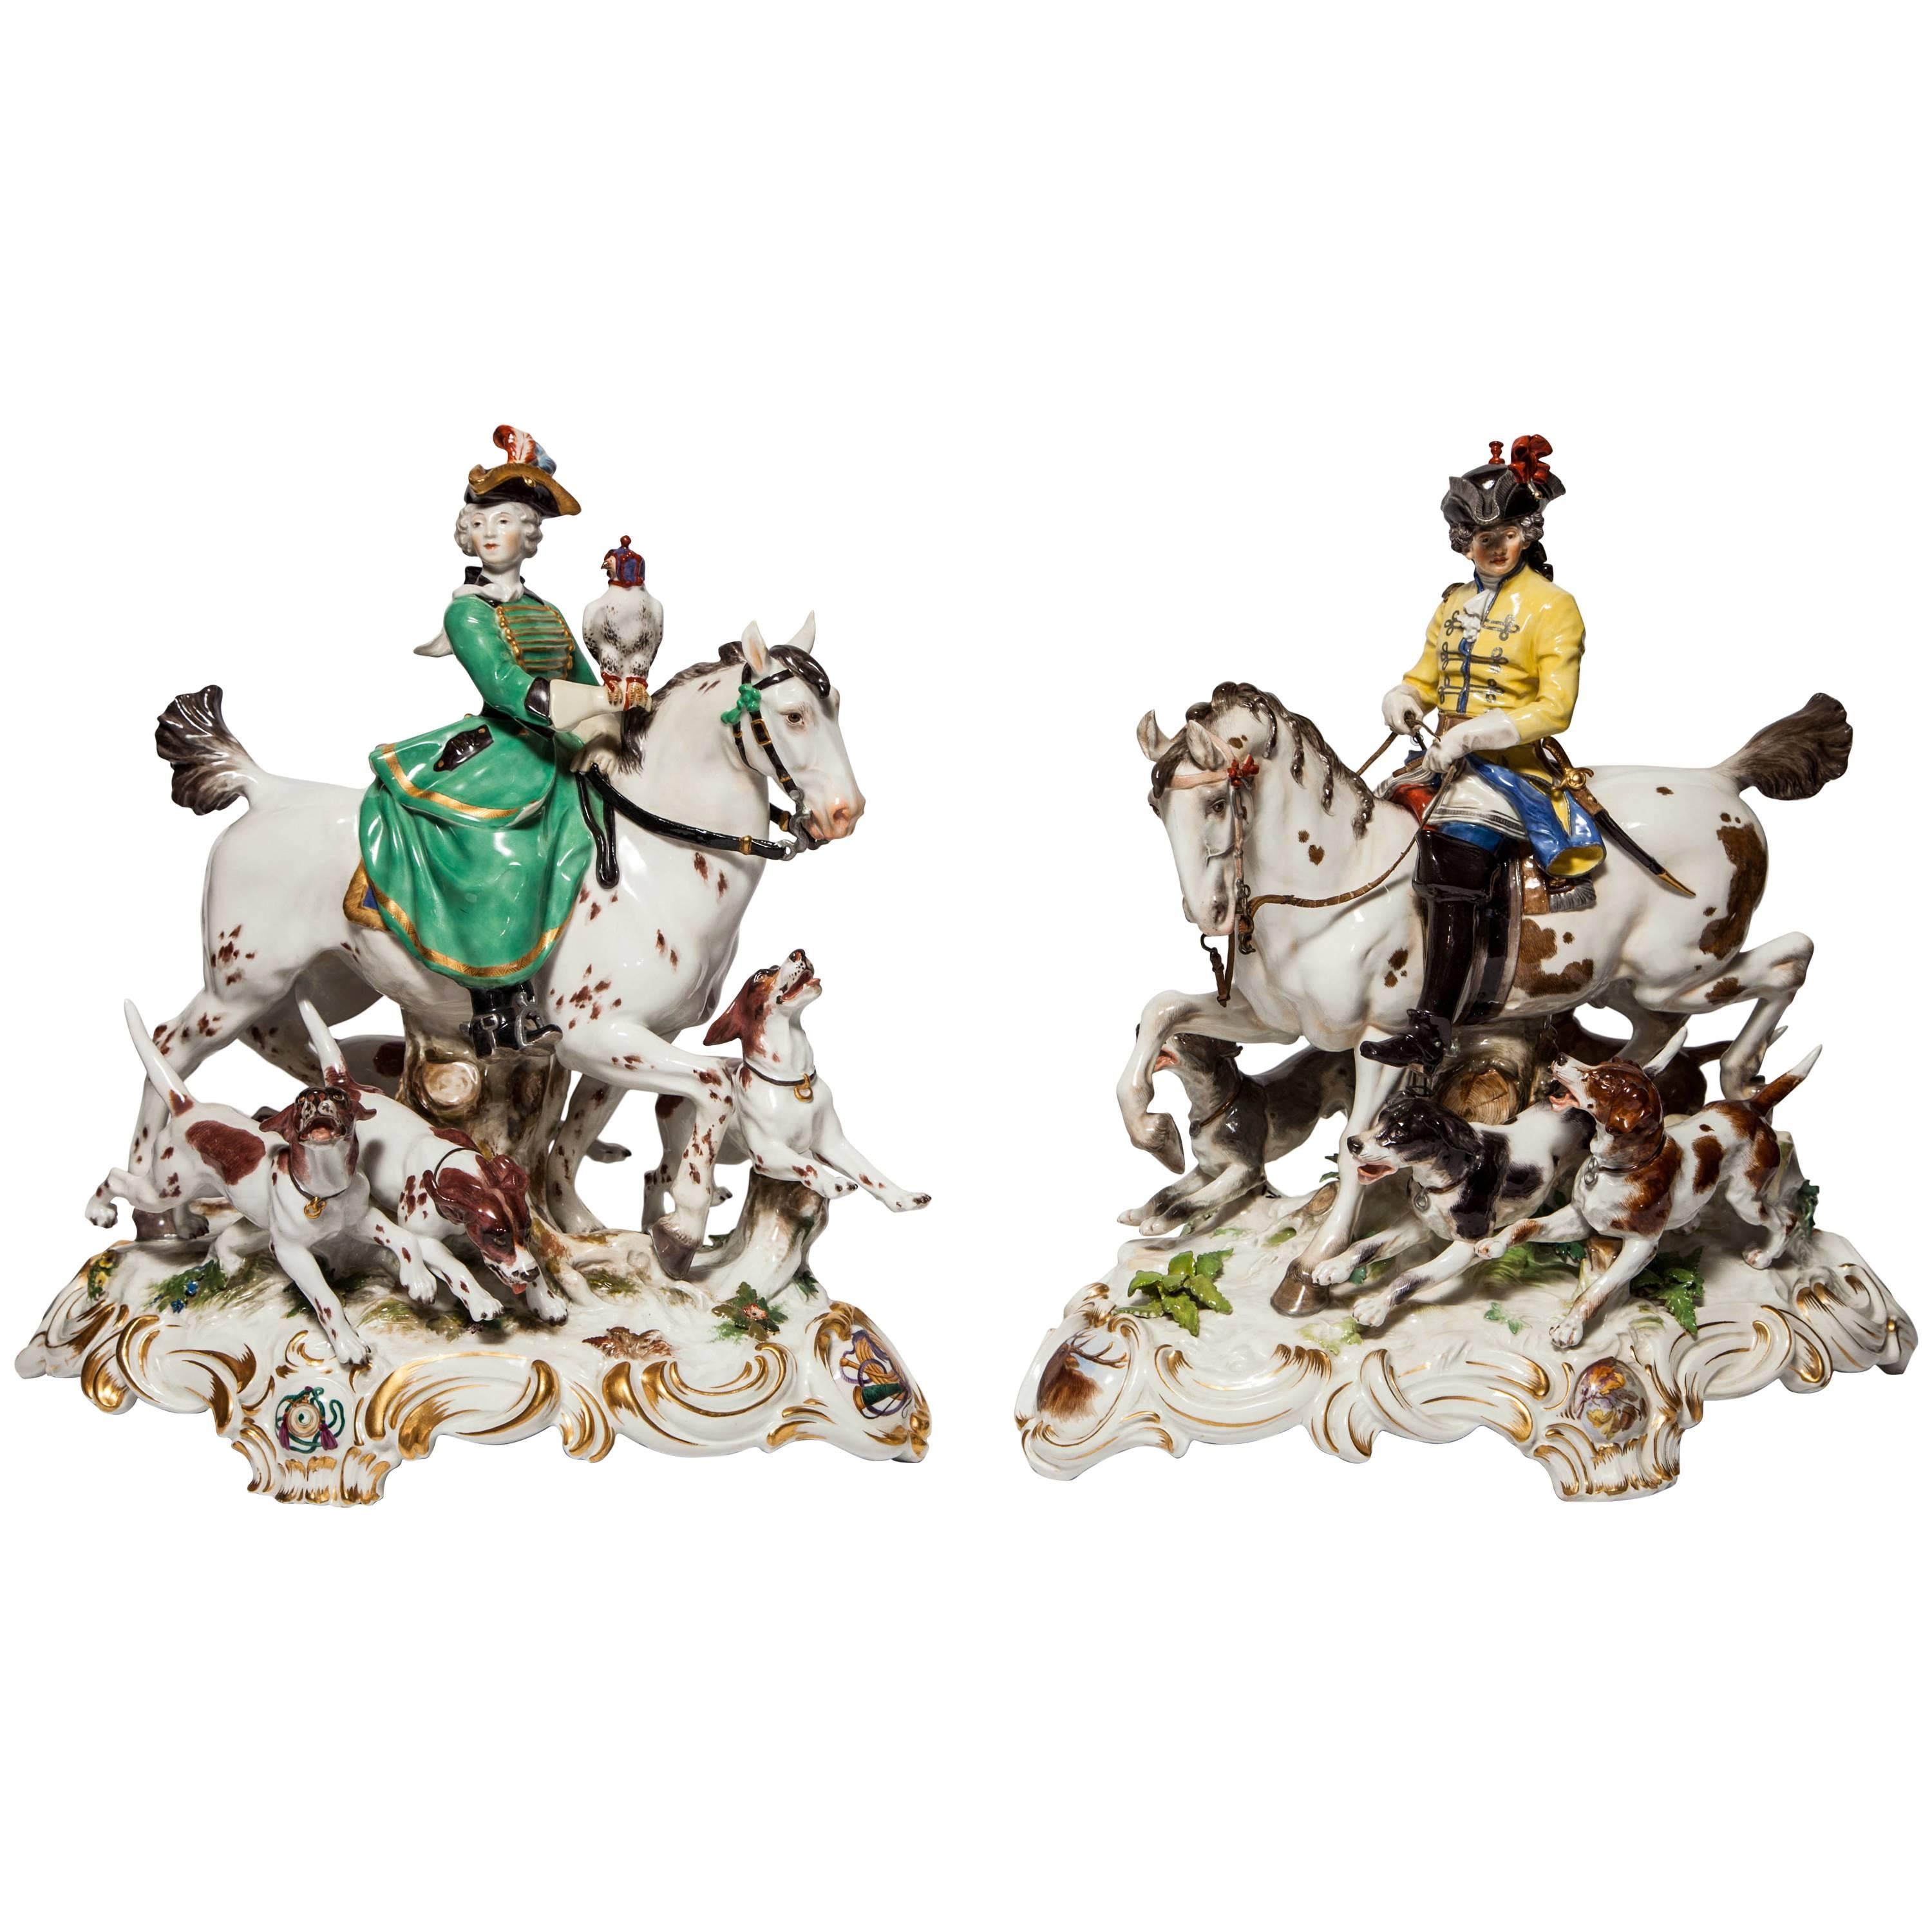 Exceptional Pair of Antique Meissen Porcelain Hunting Groups with Horses & Dogs